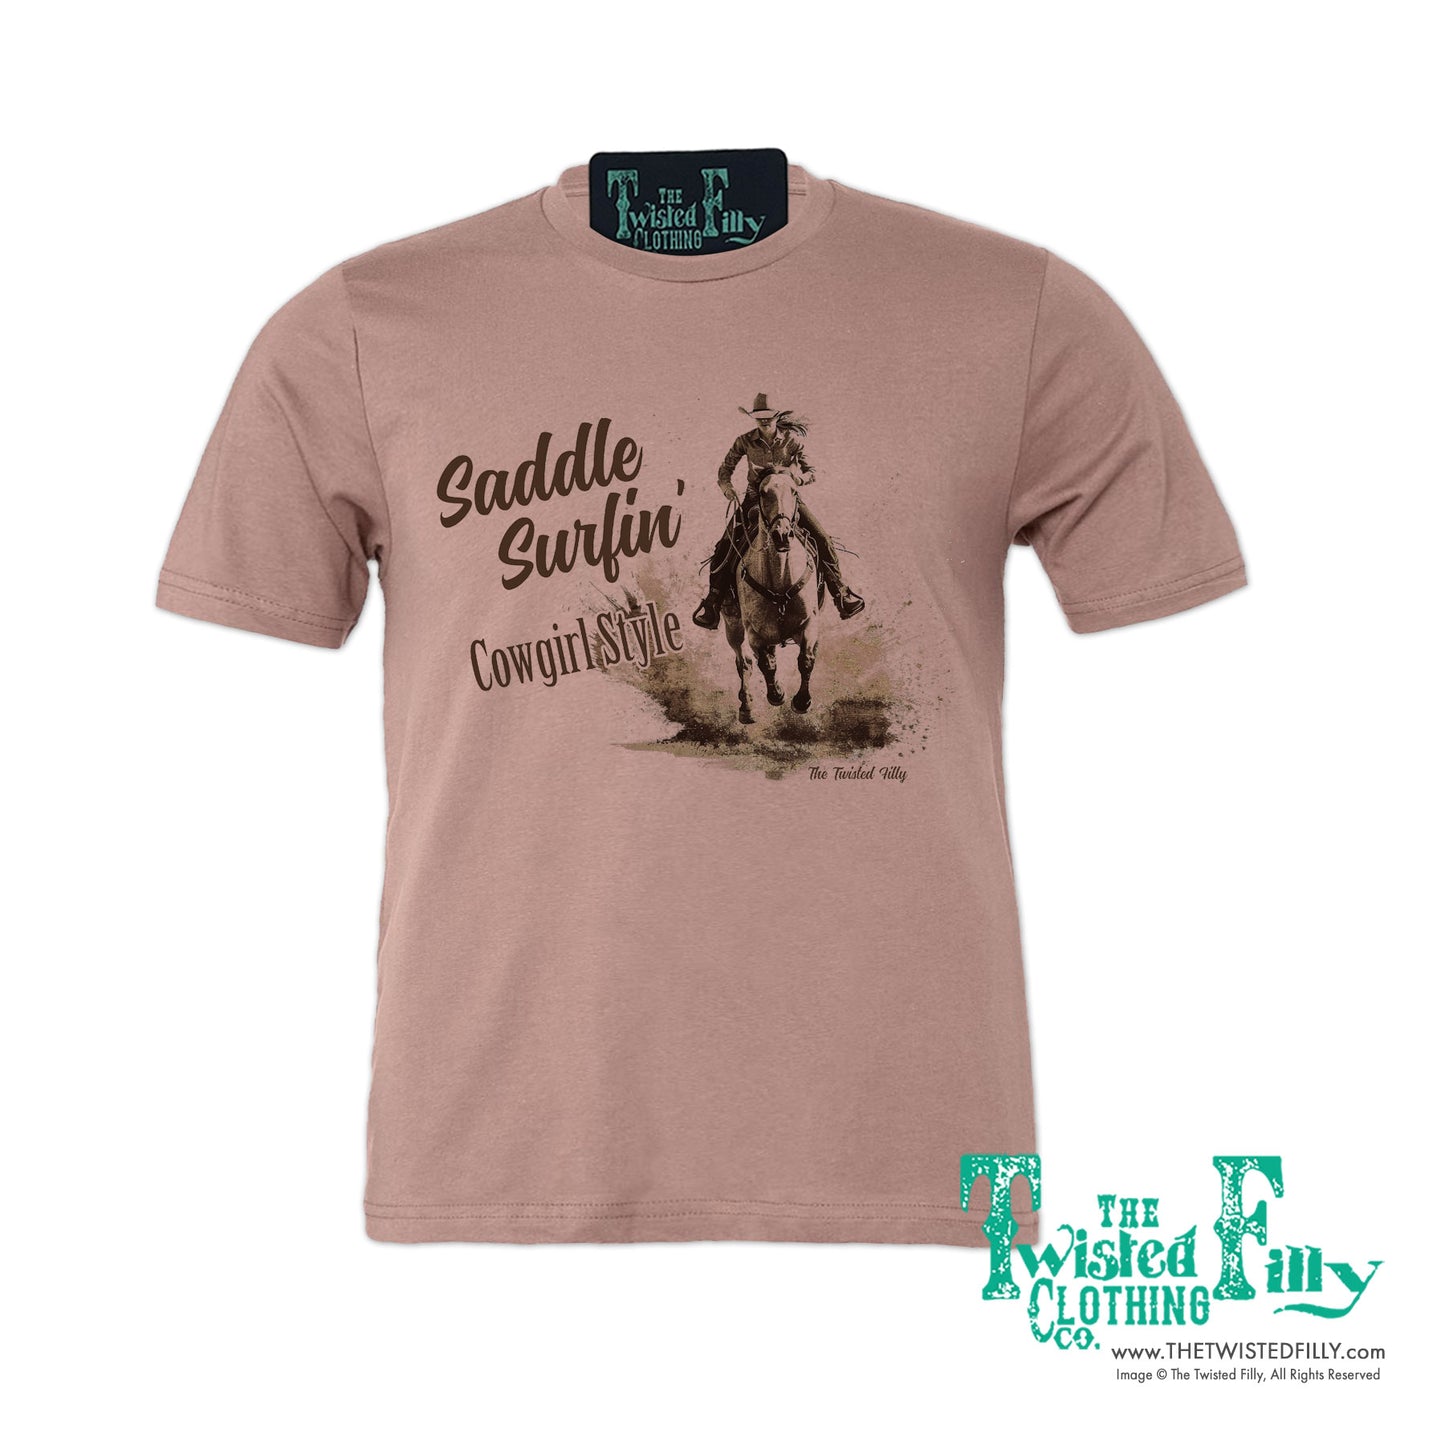 Saddle Surfin' Cowgirl Style - S/S Womens Crew Neck Unisex Tee - Assorted Colors